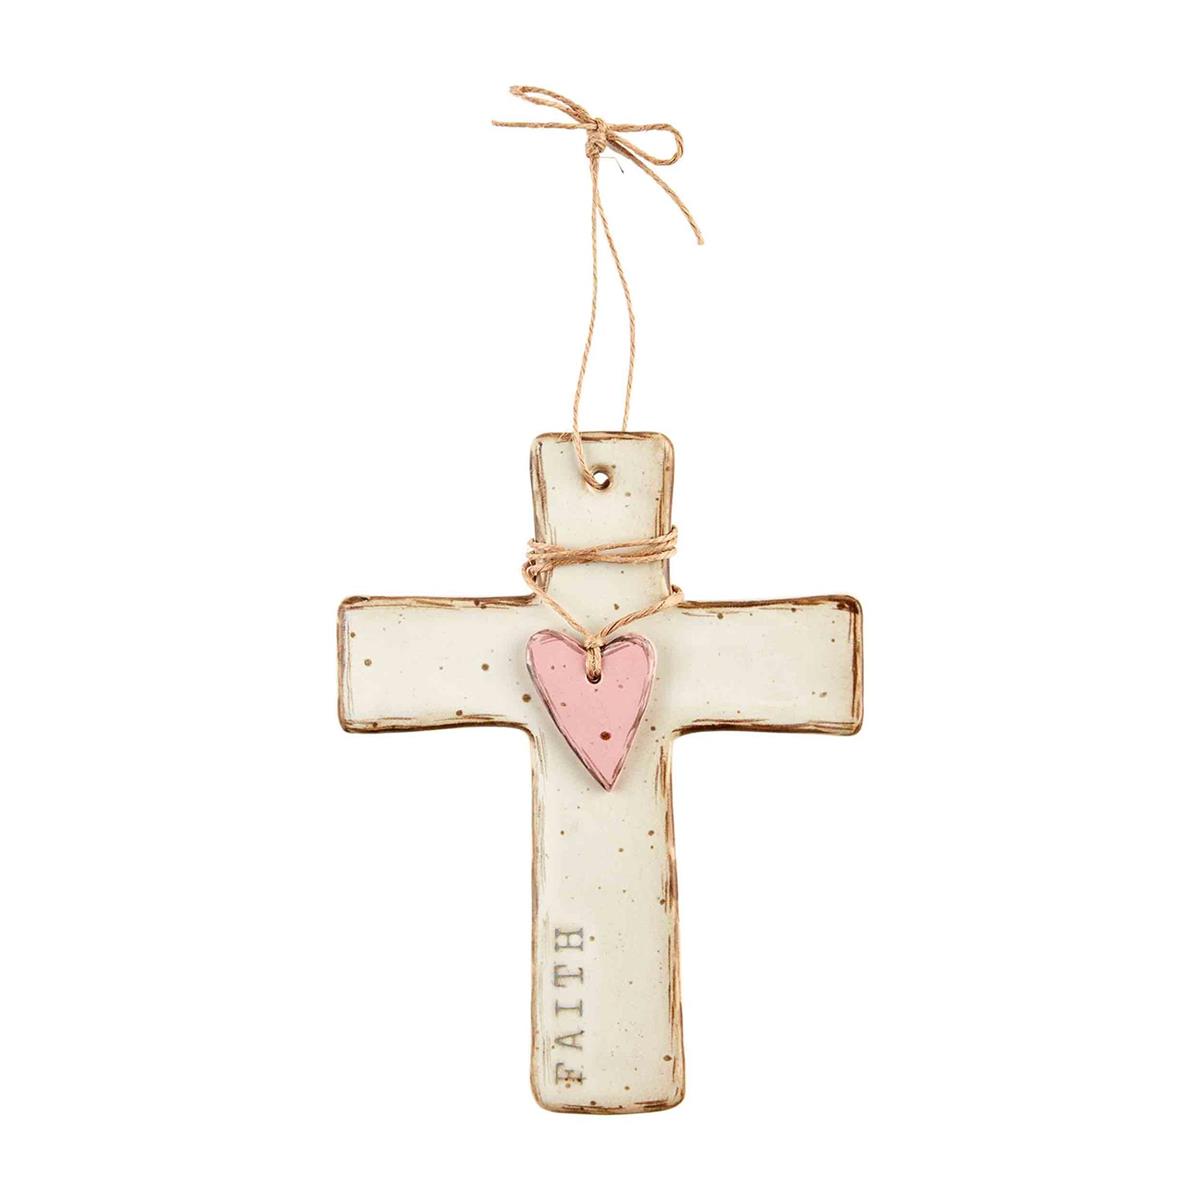 white cross with pink heart  and "faith" along the side against white background